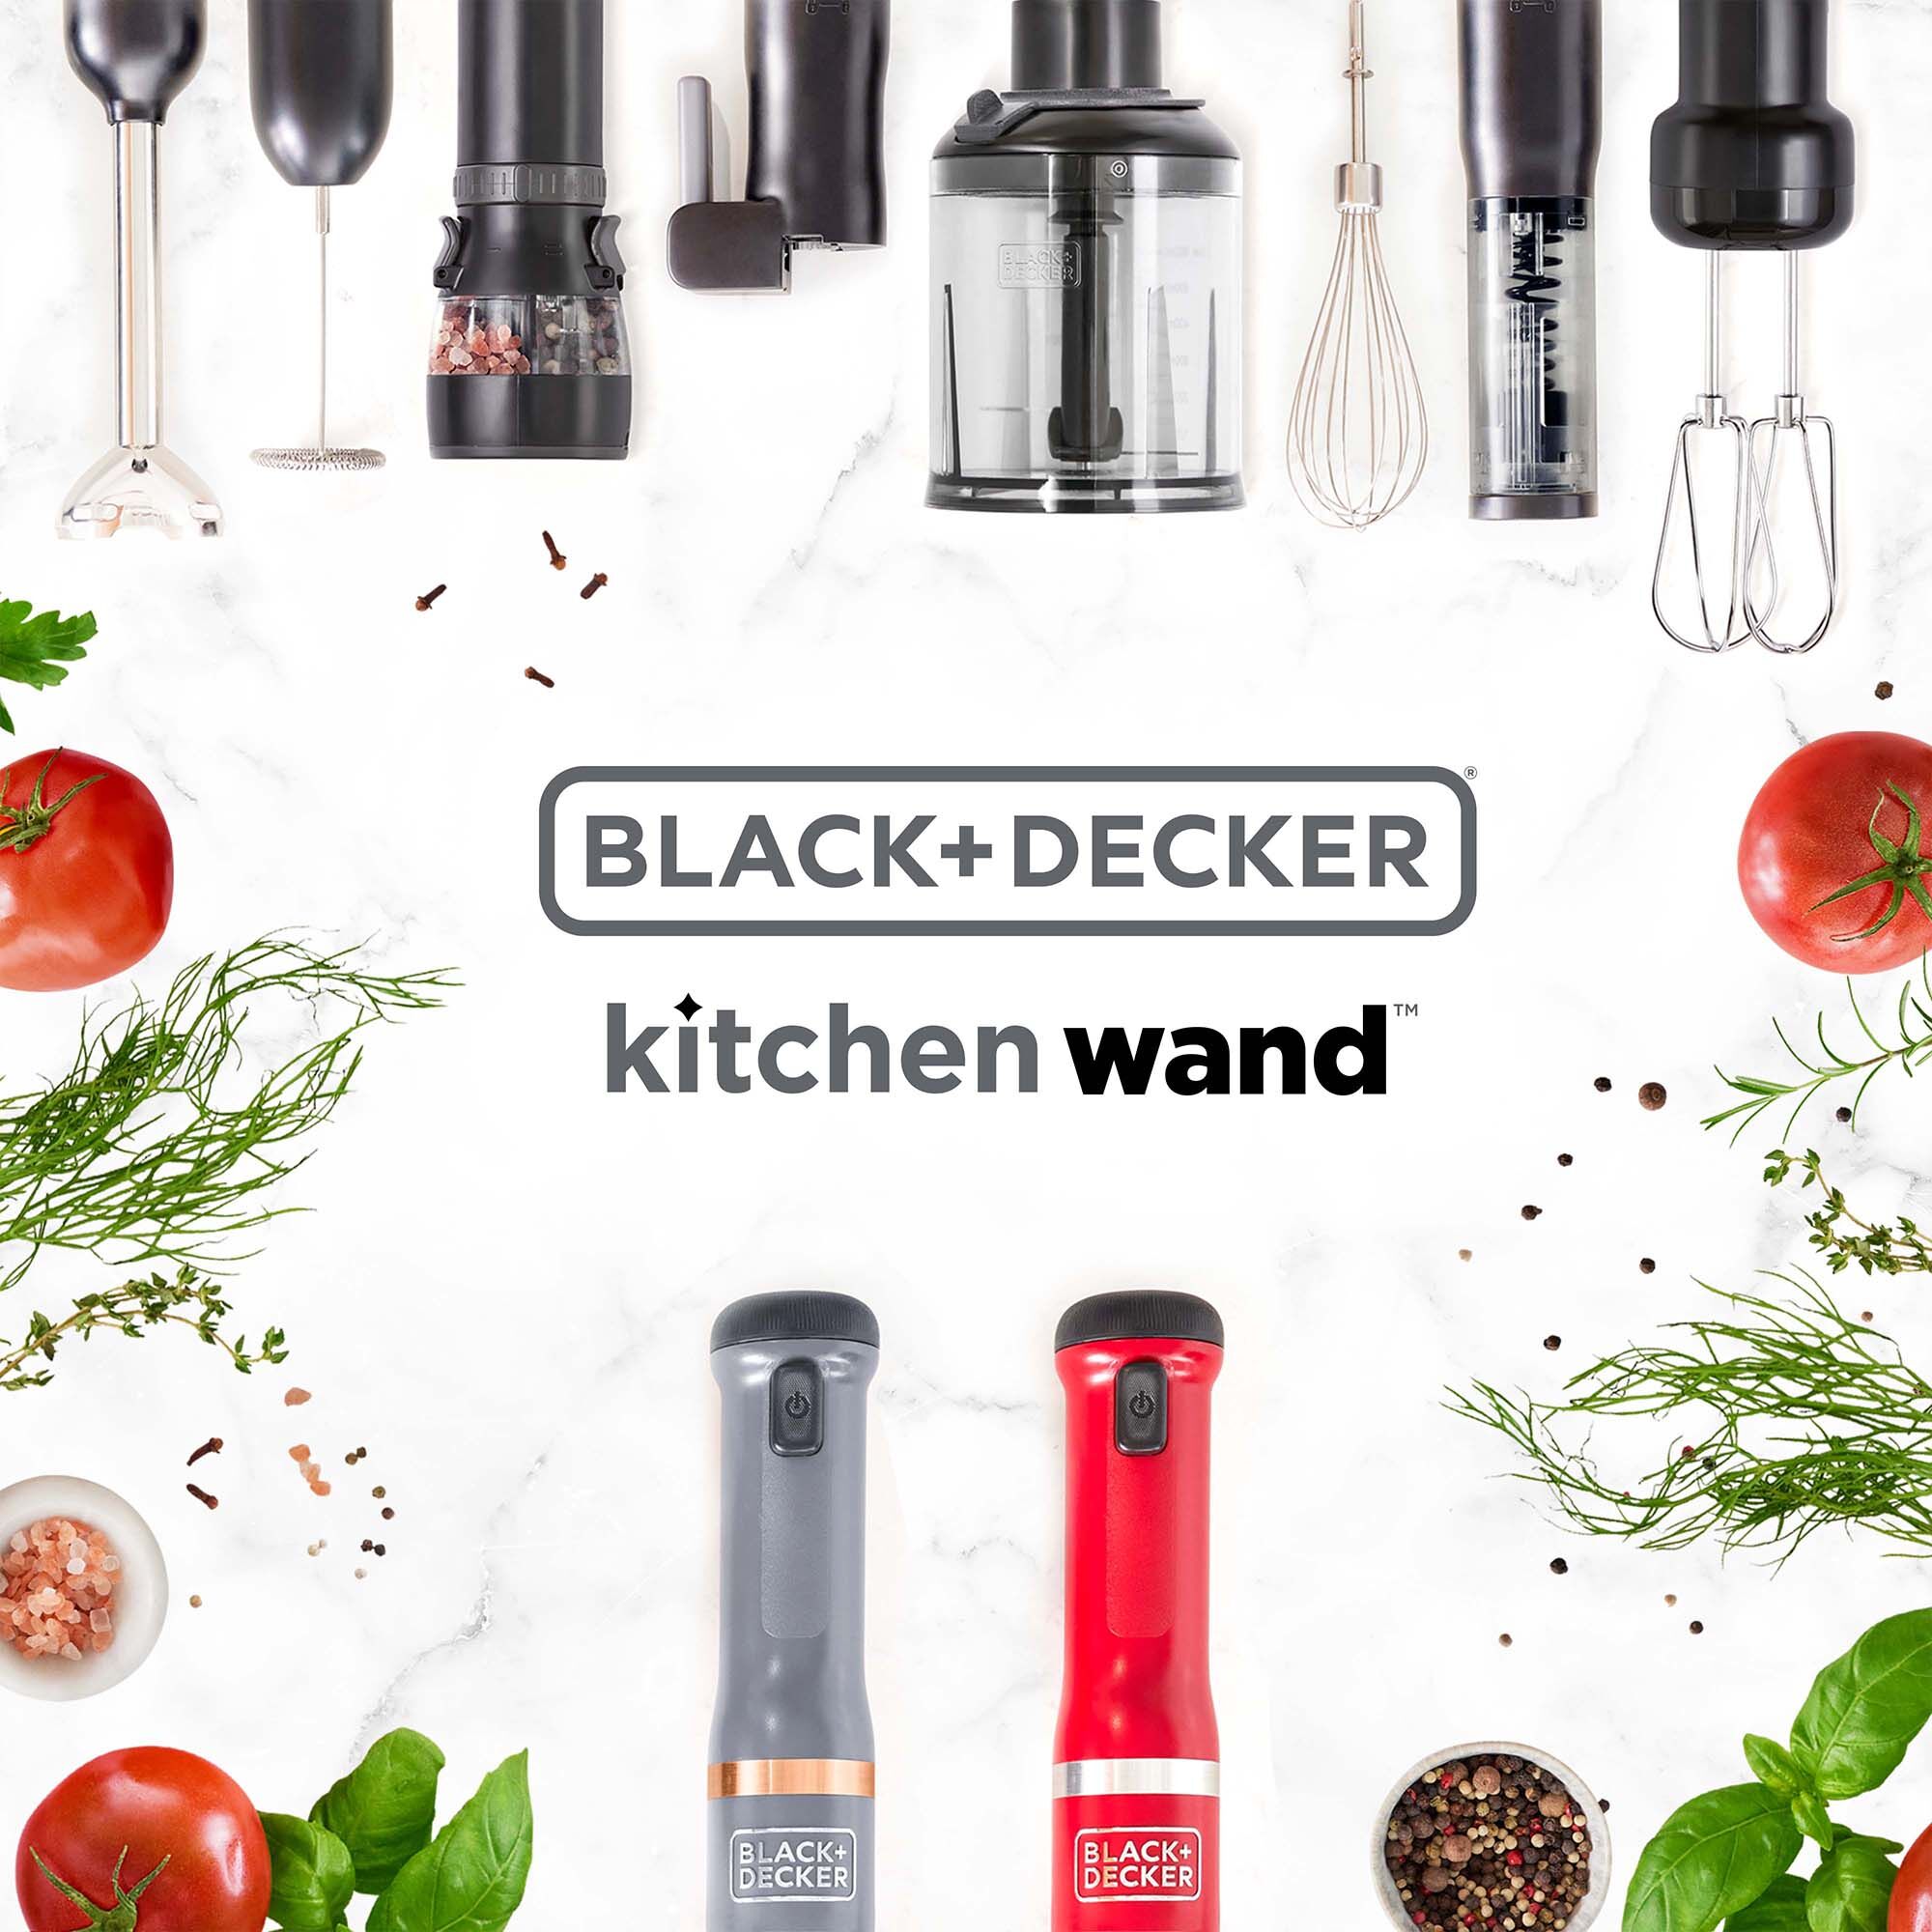 Laydown view of the BLACK+DECKER kitchen wand family